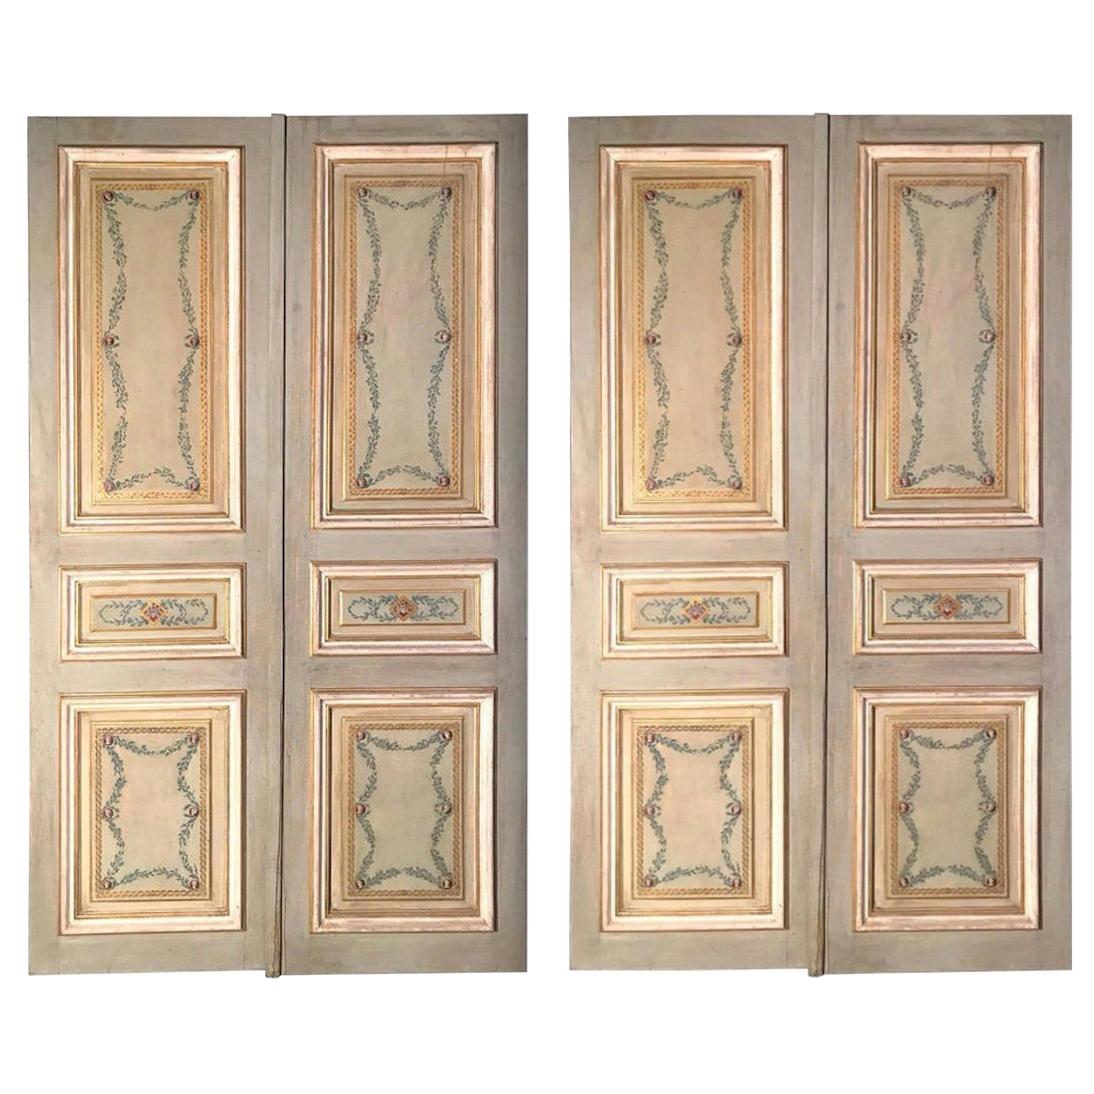 Magnificent 19th Century Italian Painted Doors or Panelling